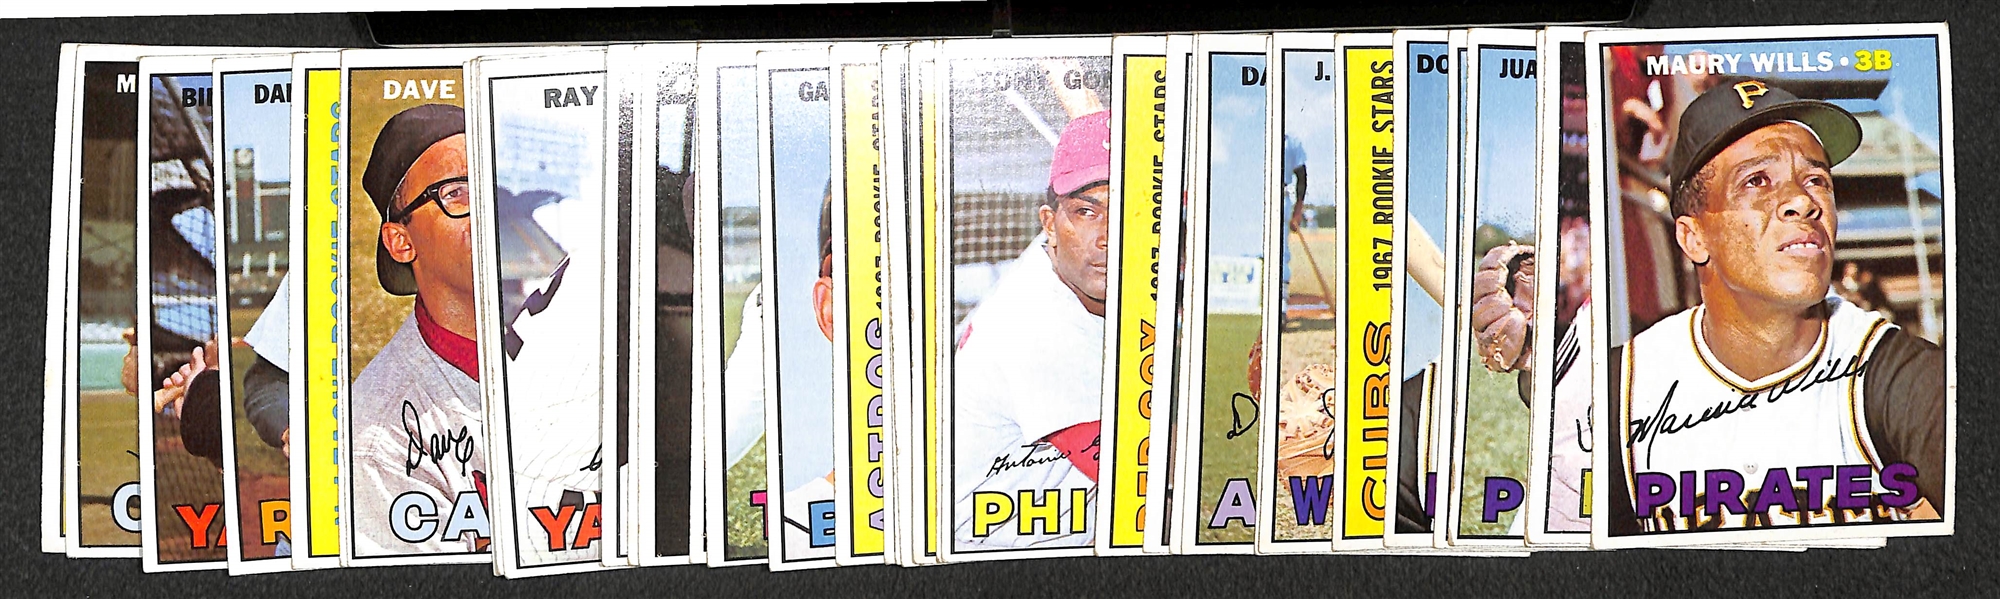 Lot of 40 Different 1967 Topps Baseball High Number Cards w. Maury Wills (First Topps Card)